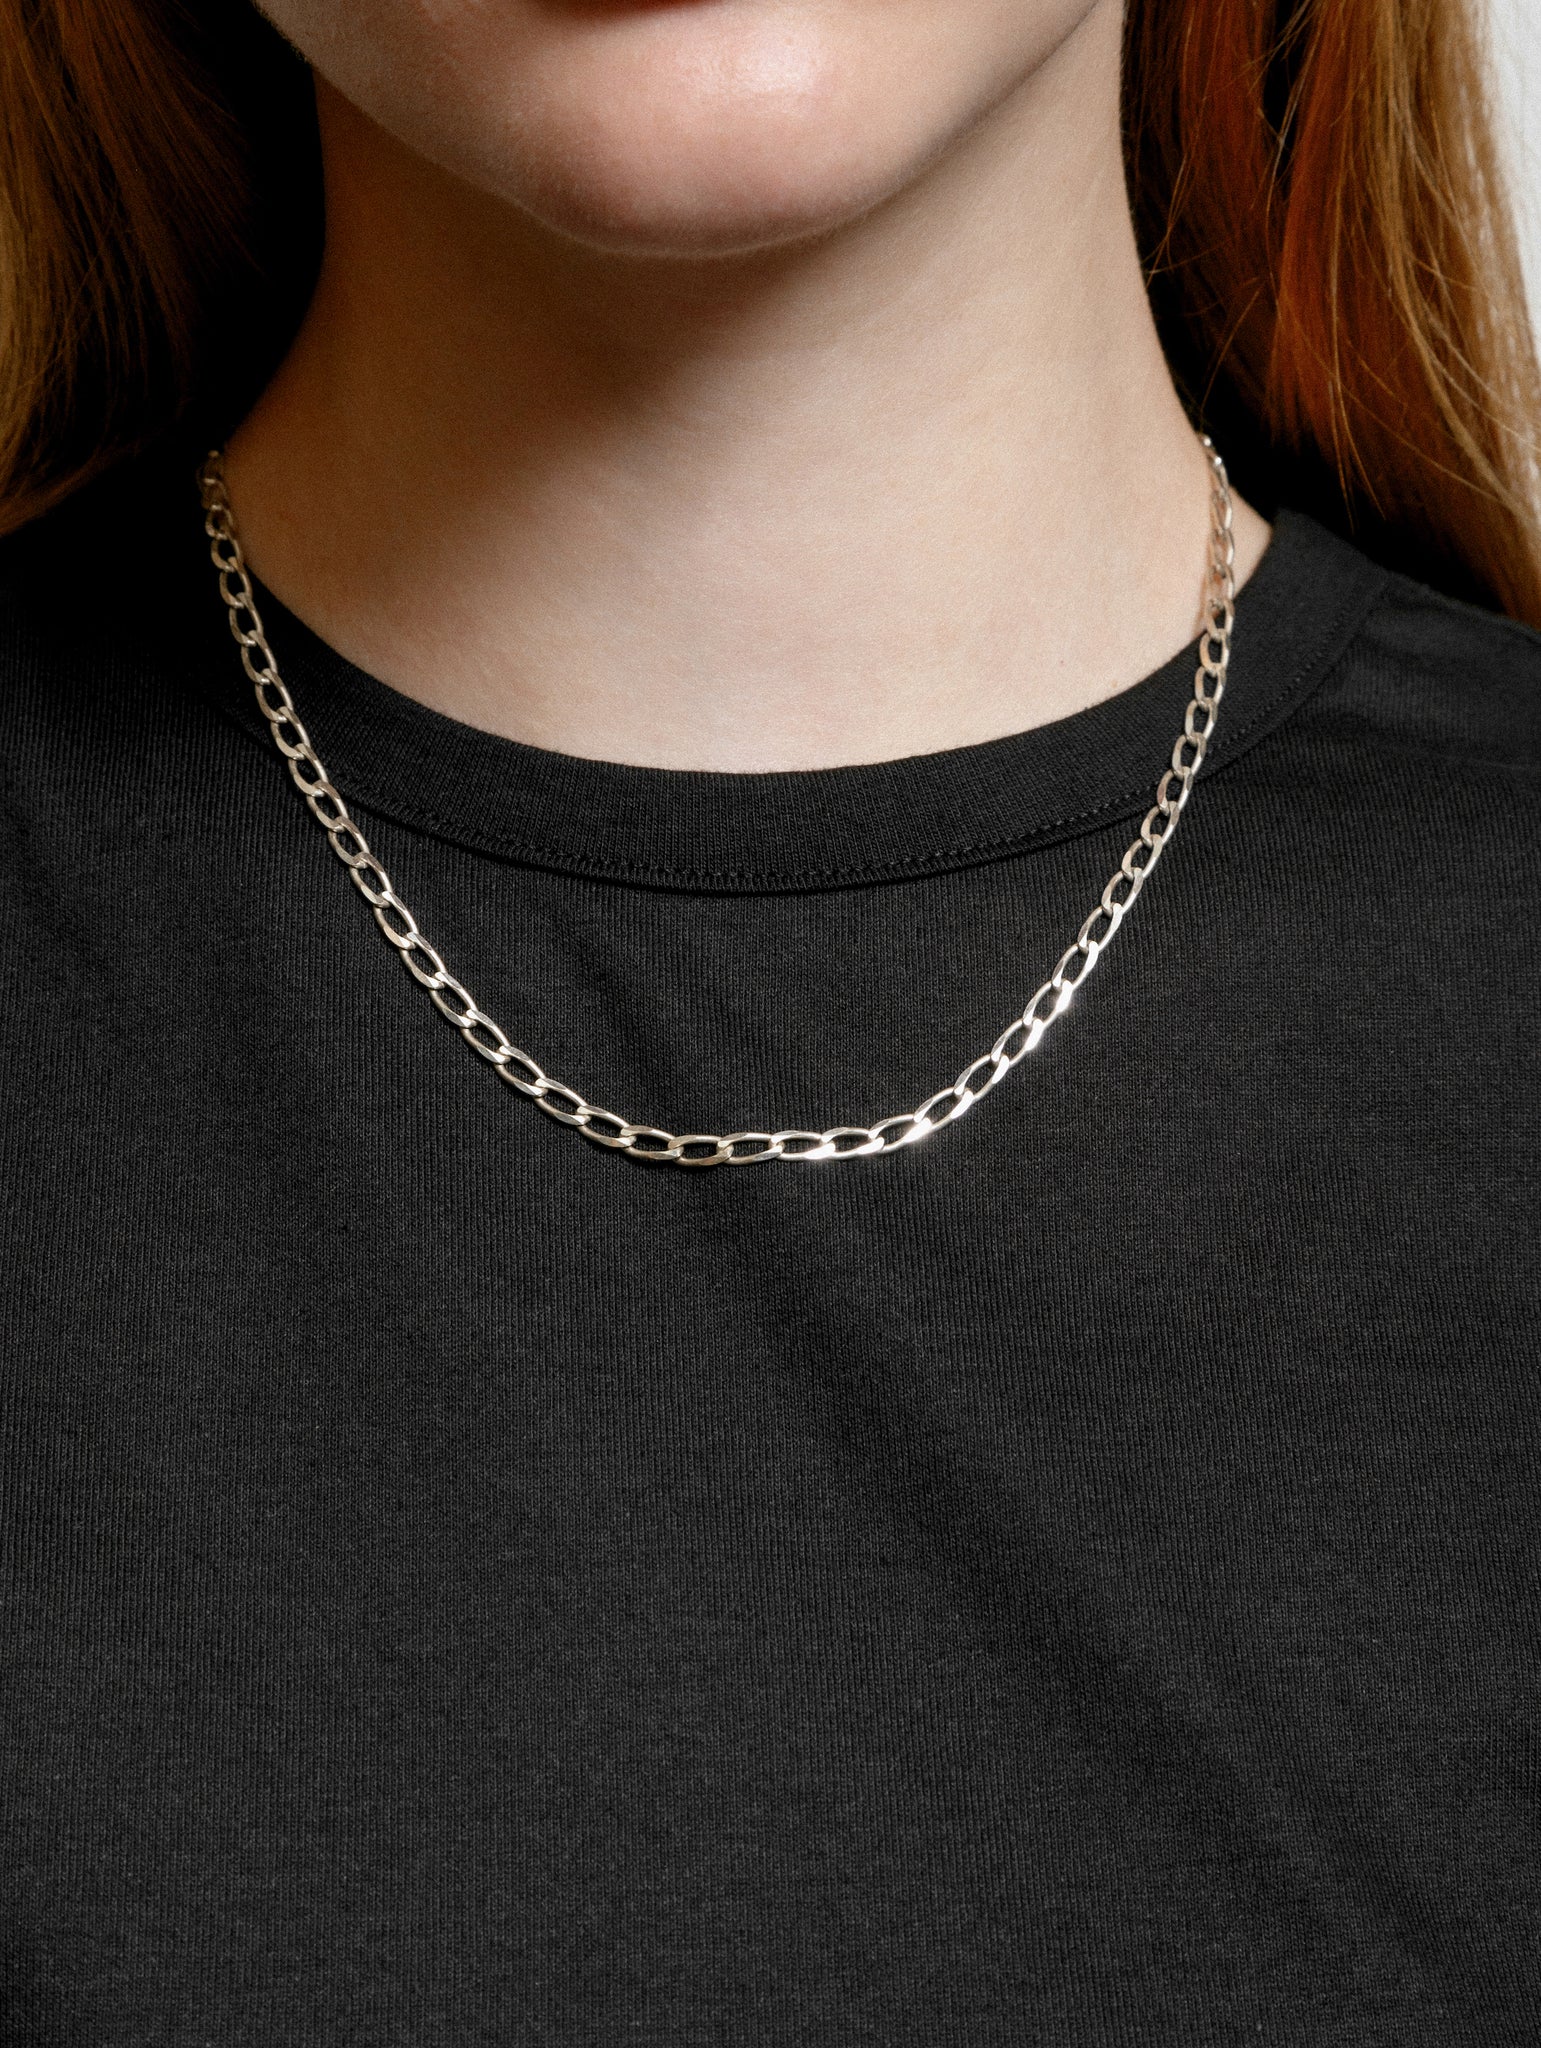 Wolf Circus Simple Unisex Curb Chain Link Necklace 925 Sterling Silver | Malcolm Necklace in Sterling Silver-Necklaces-wolfcircus.com